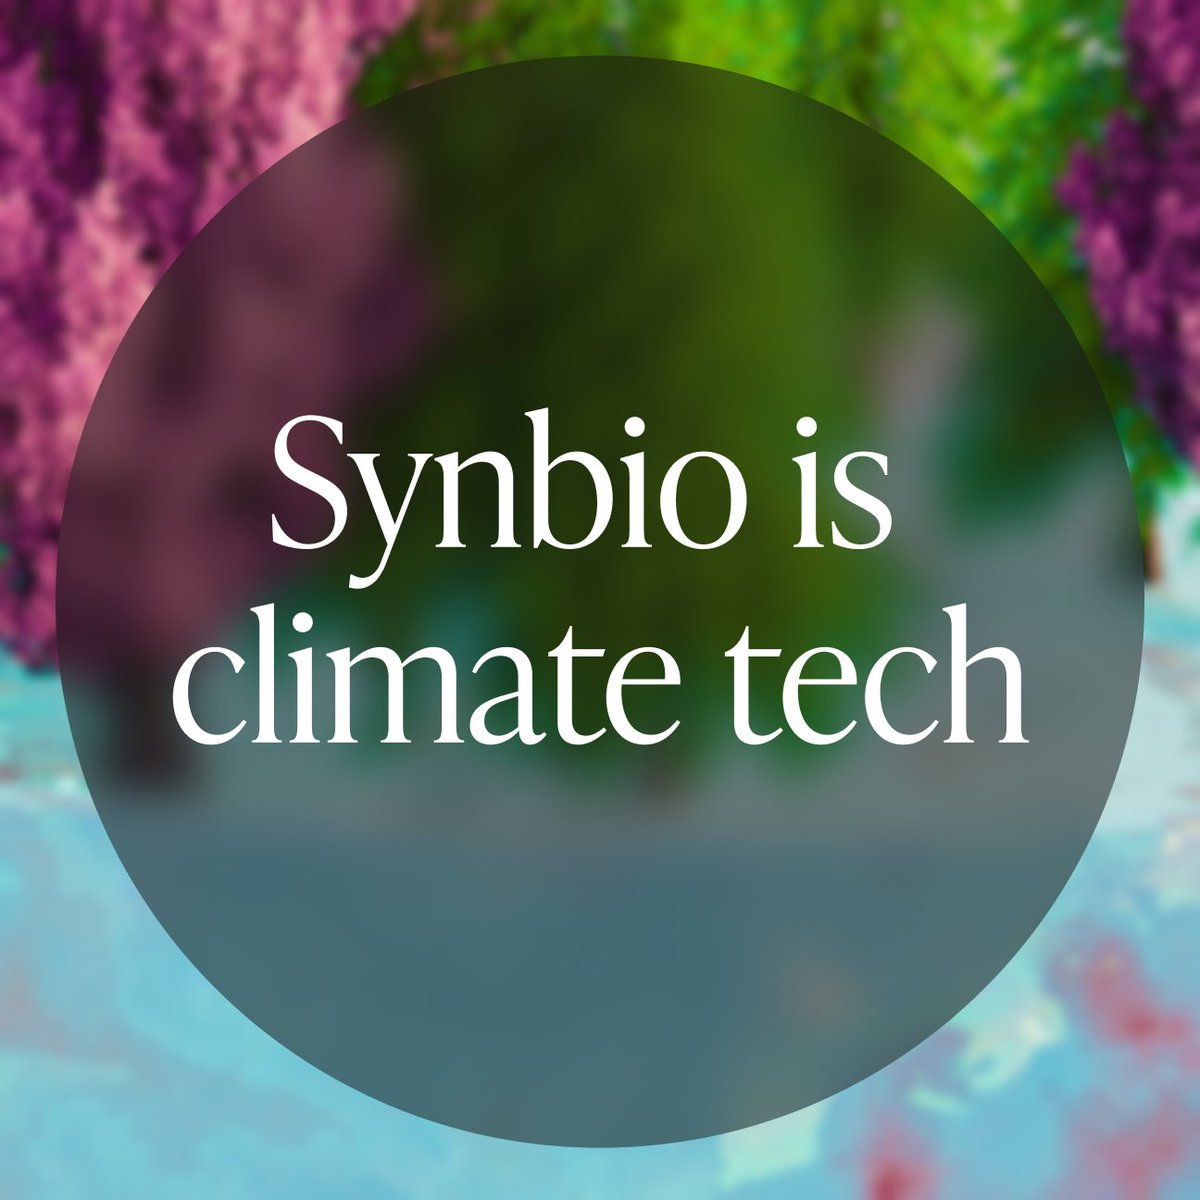 Synbio is climate tech. Today, we're thrilled to release three announcements centered around our work in sustainability! Find out more: hubs.la/Q02dmP7f0